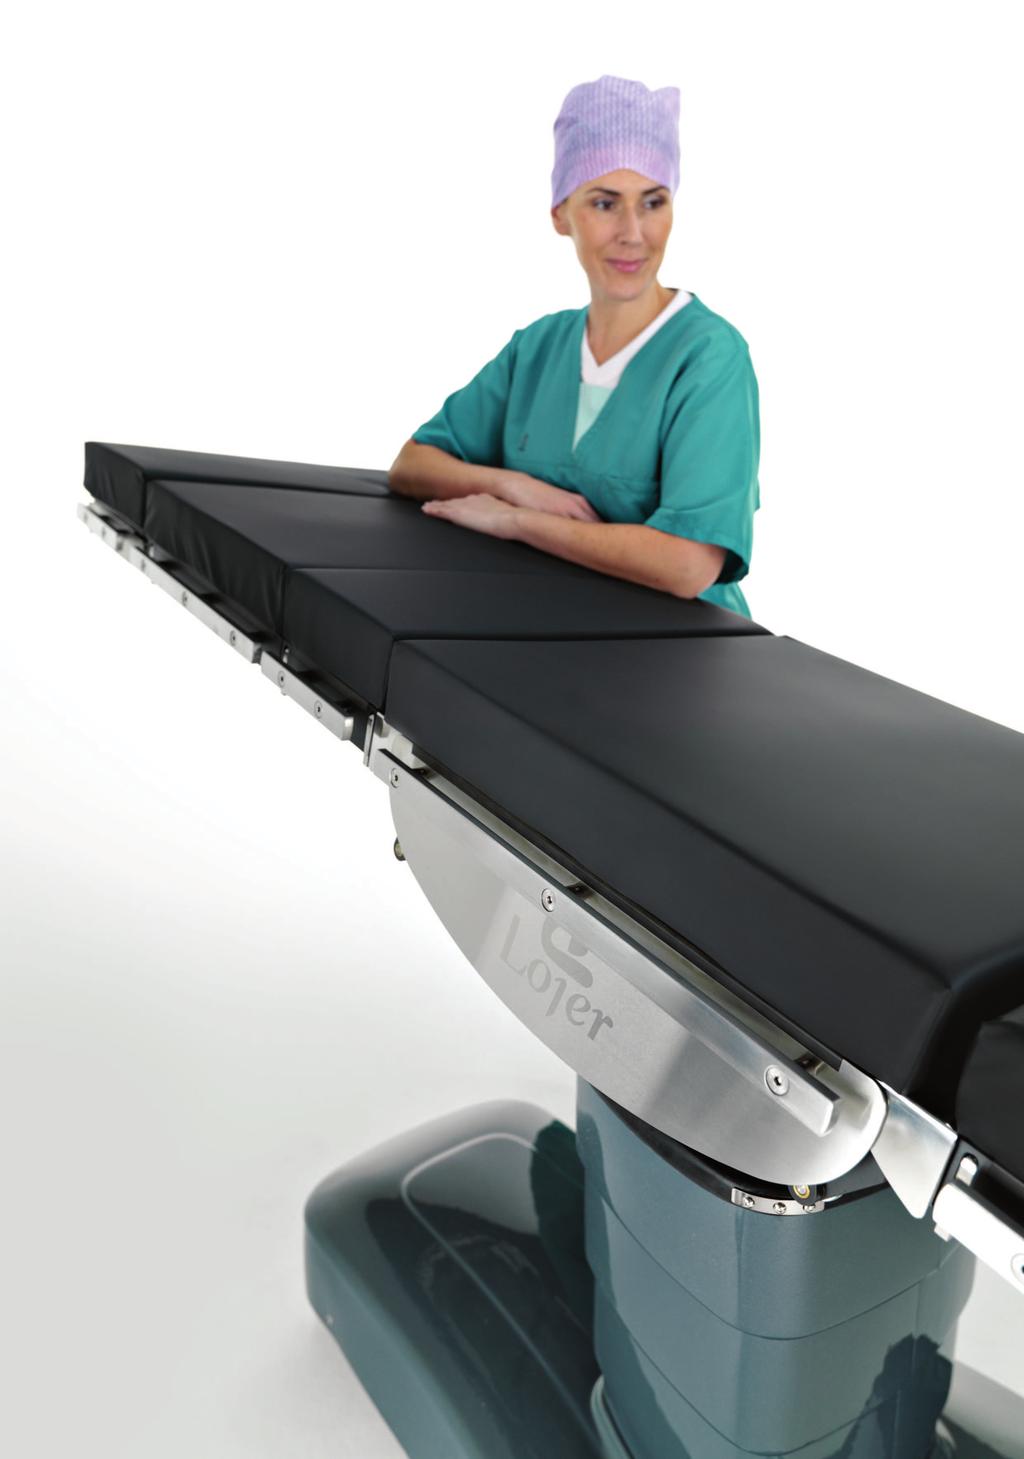 Lojer Group (Finland) is leading Scandinavian manufacturers of medical furniture and physiotherapy equipment.